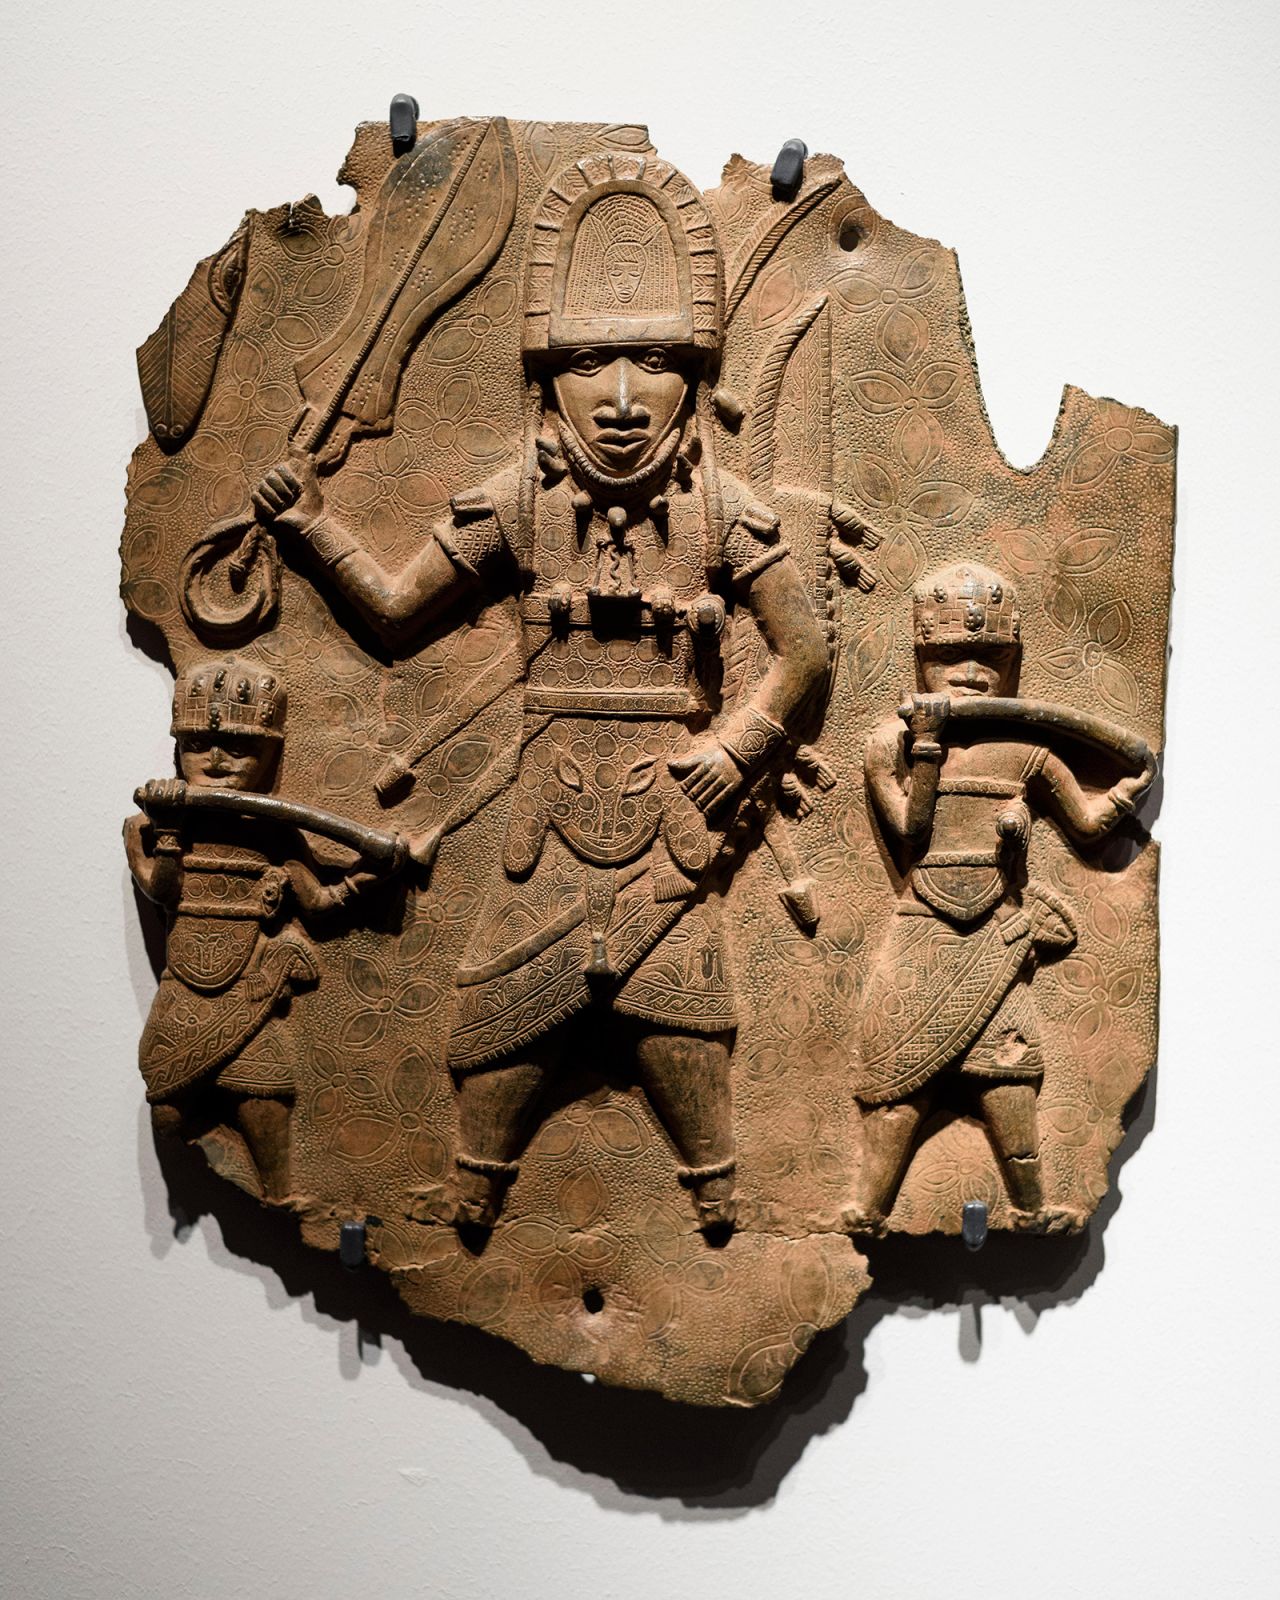 A Benin Bronze, pictured in Berlin, depicts a high-ranking dignitary with sword and rectangular bell accompanied by two hornblowers, brass plaque.